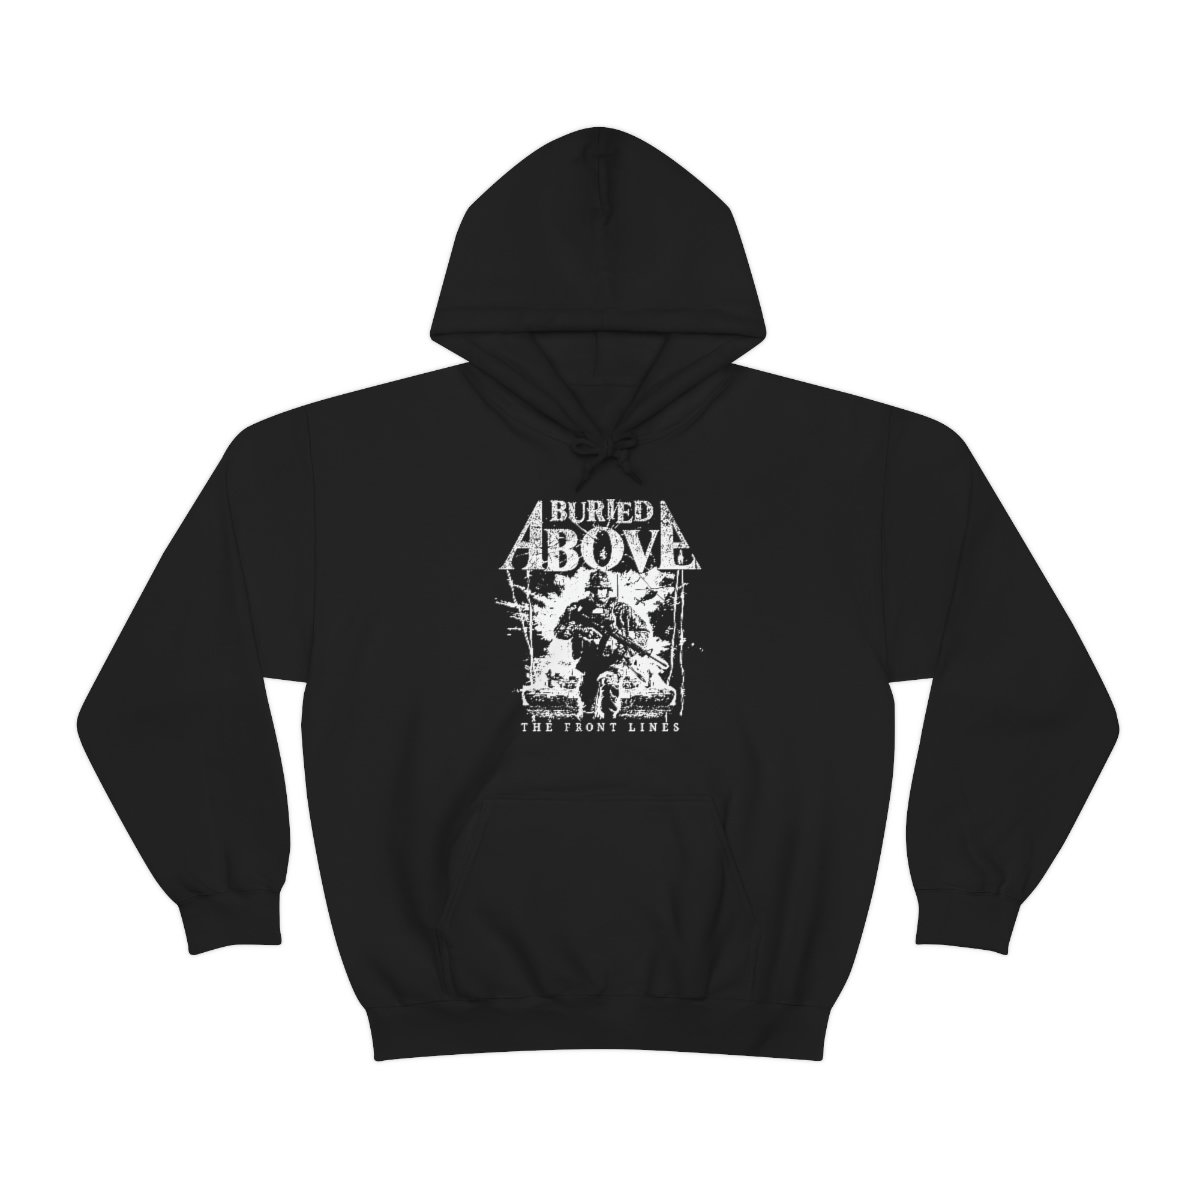 Buried Above – The Front Lines Pullover Hooded Sweatshirt